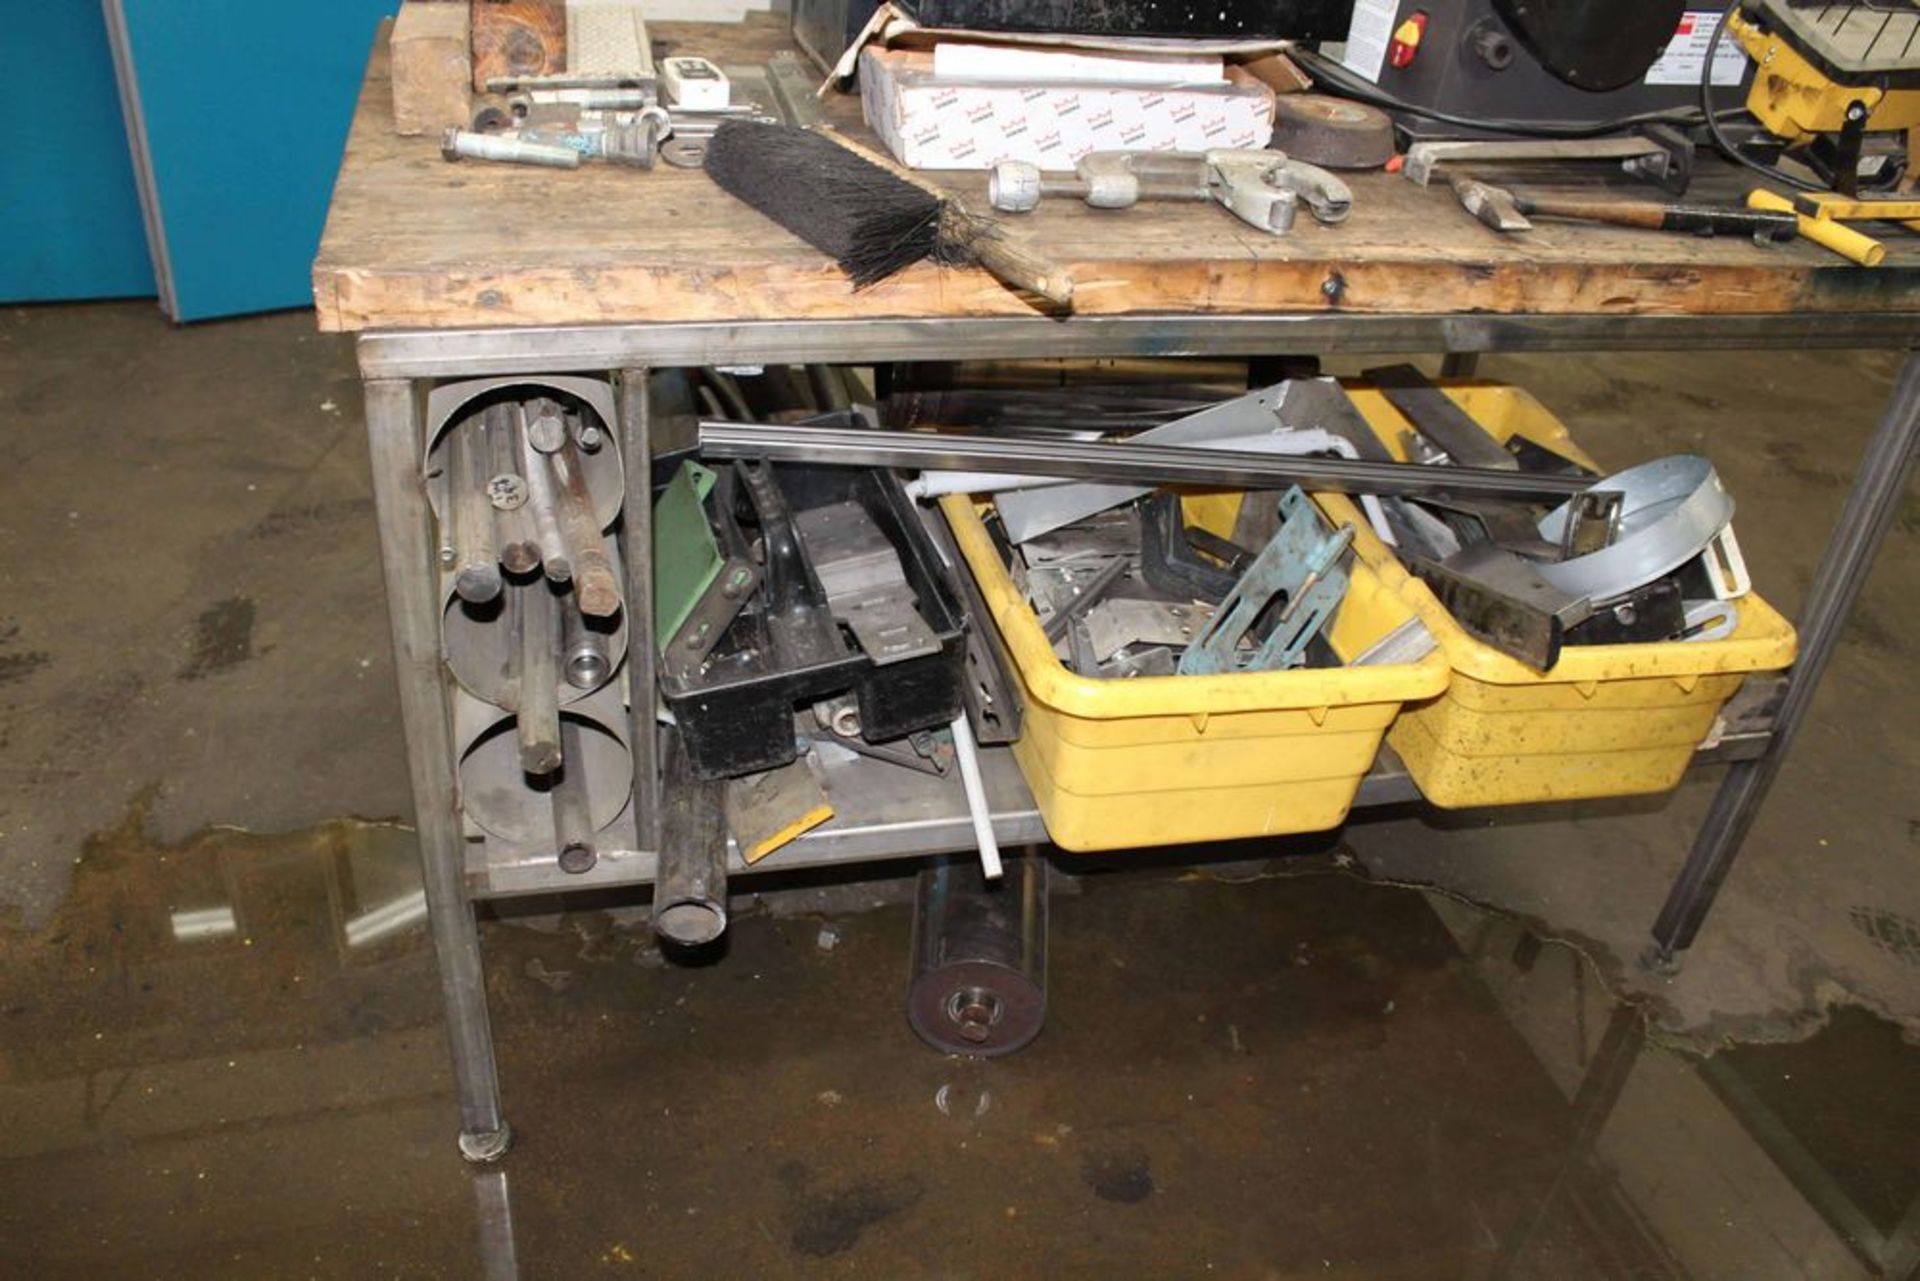 Metal Shop Table with Contents ( 6 X 9 Dayton Sander Model # 35GW71, Assorted Shafts with Key) - Image 3 of 6